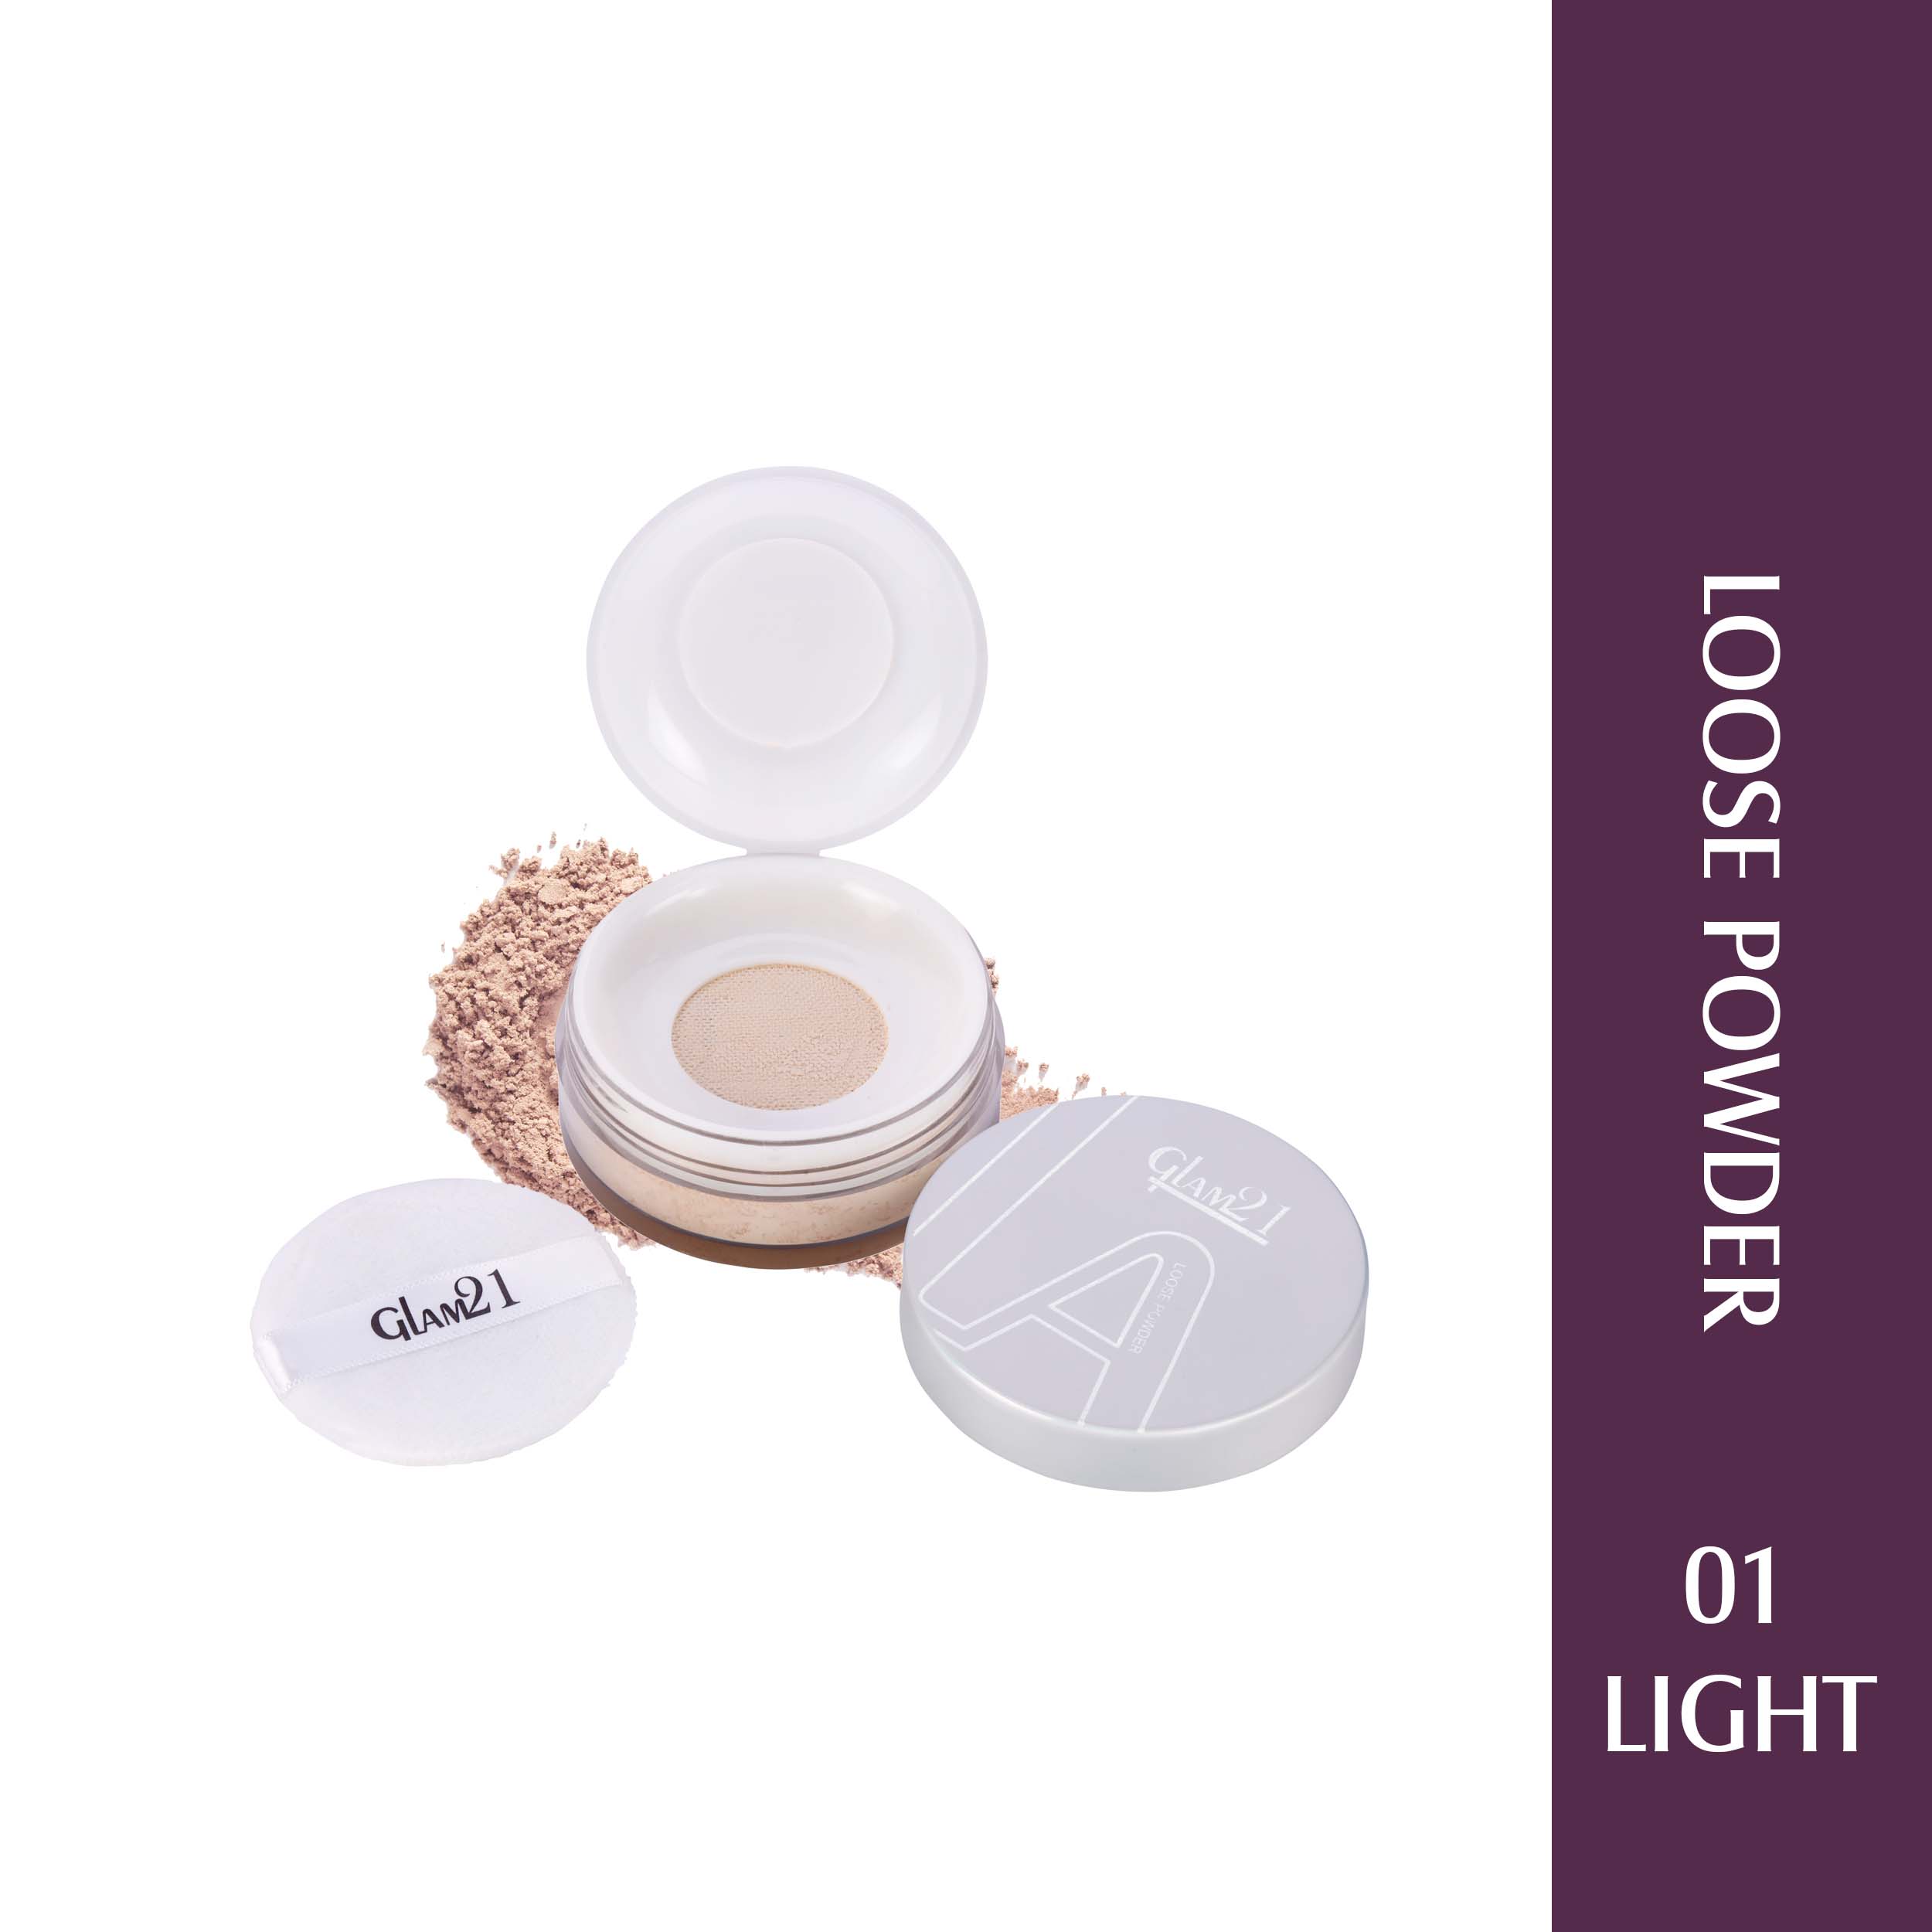 Glam21 Loose Face Powder Compact, 8 g Absorb Excess Oil & Sweat | Give the Best Sheer Finish Compact, 8 g (Light)